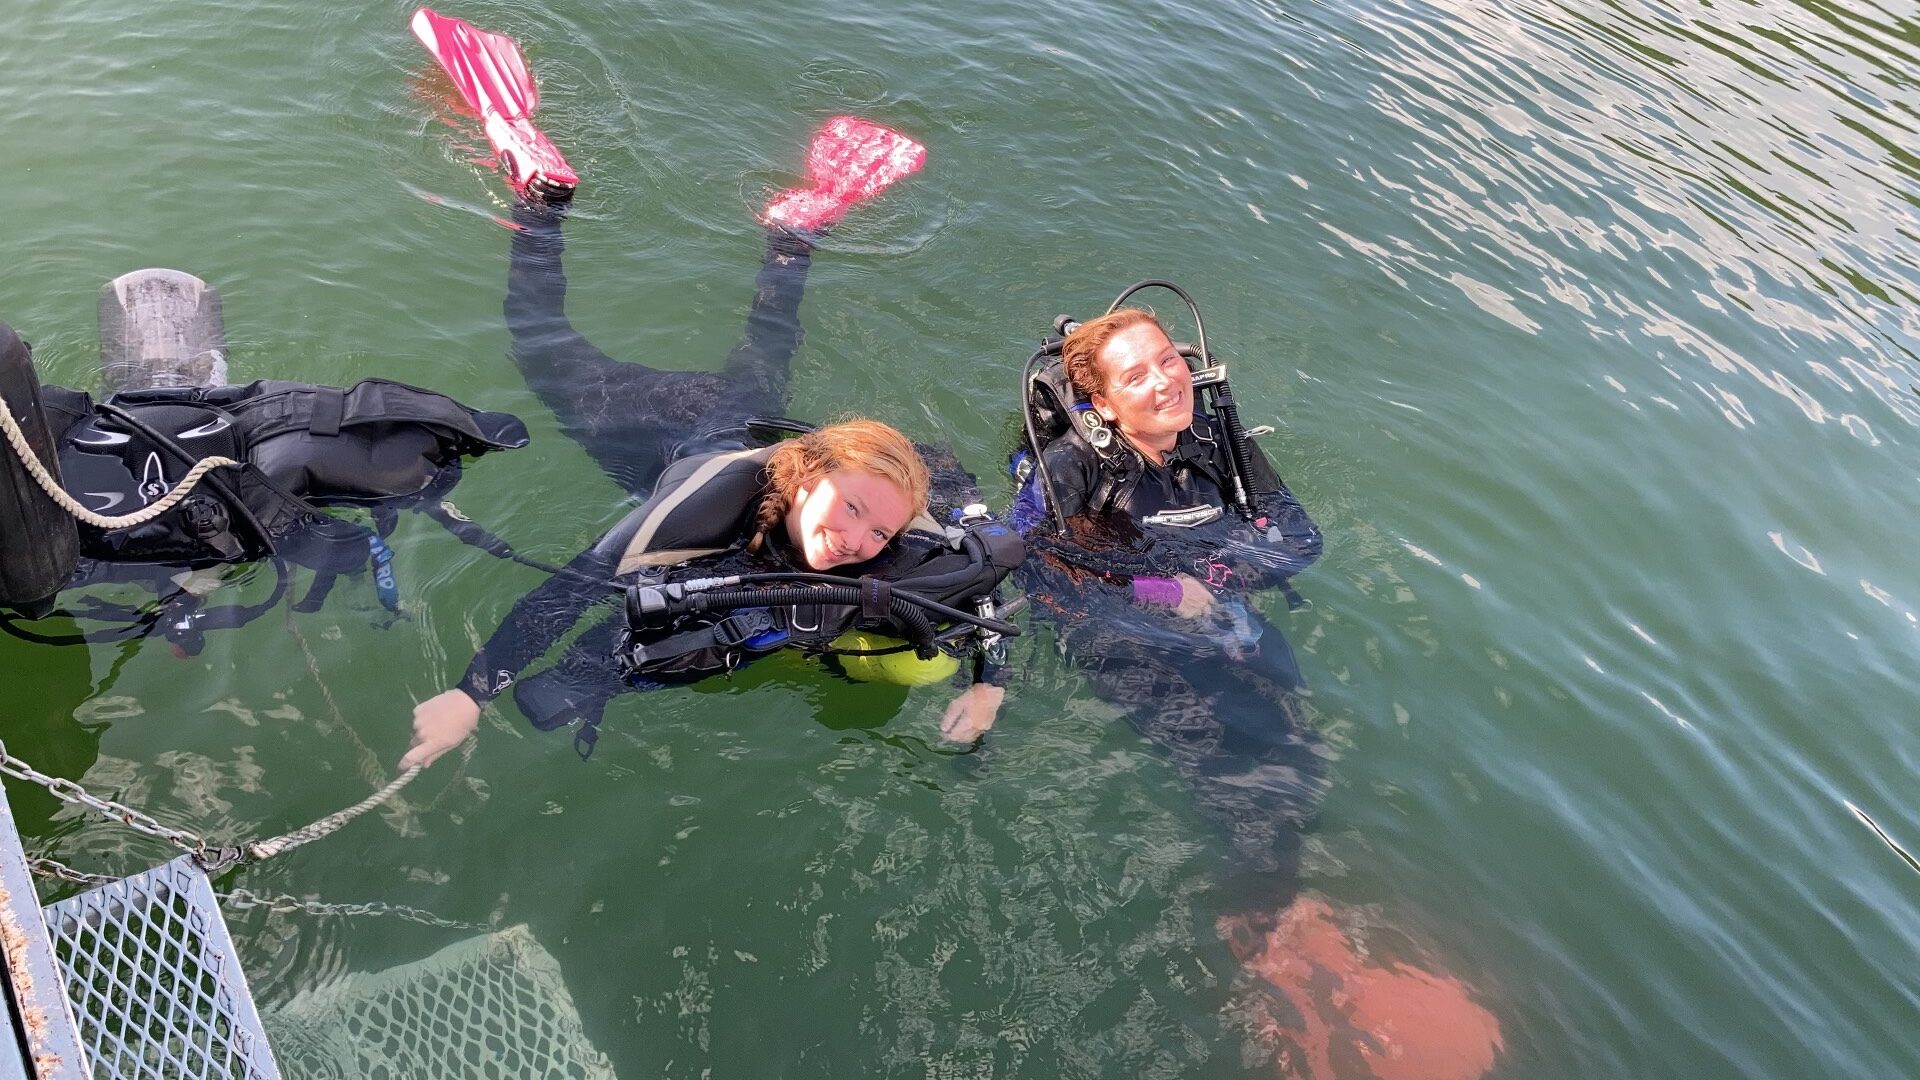 DIvers Cheyenne and Sarah rest at the surface smiling at the camera.